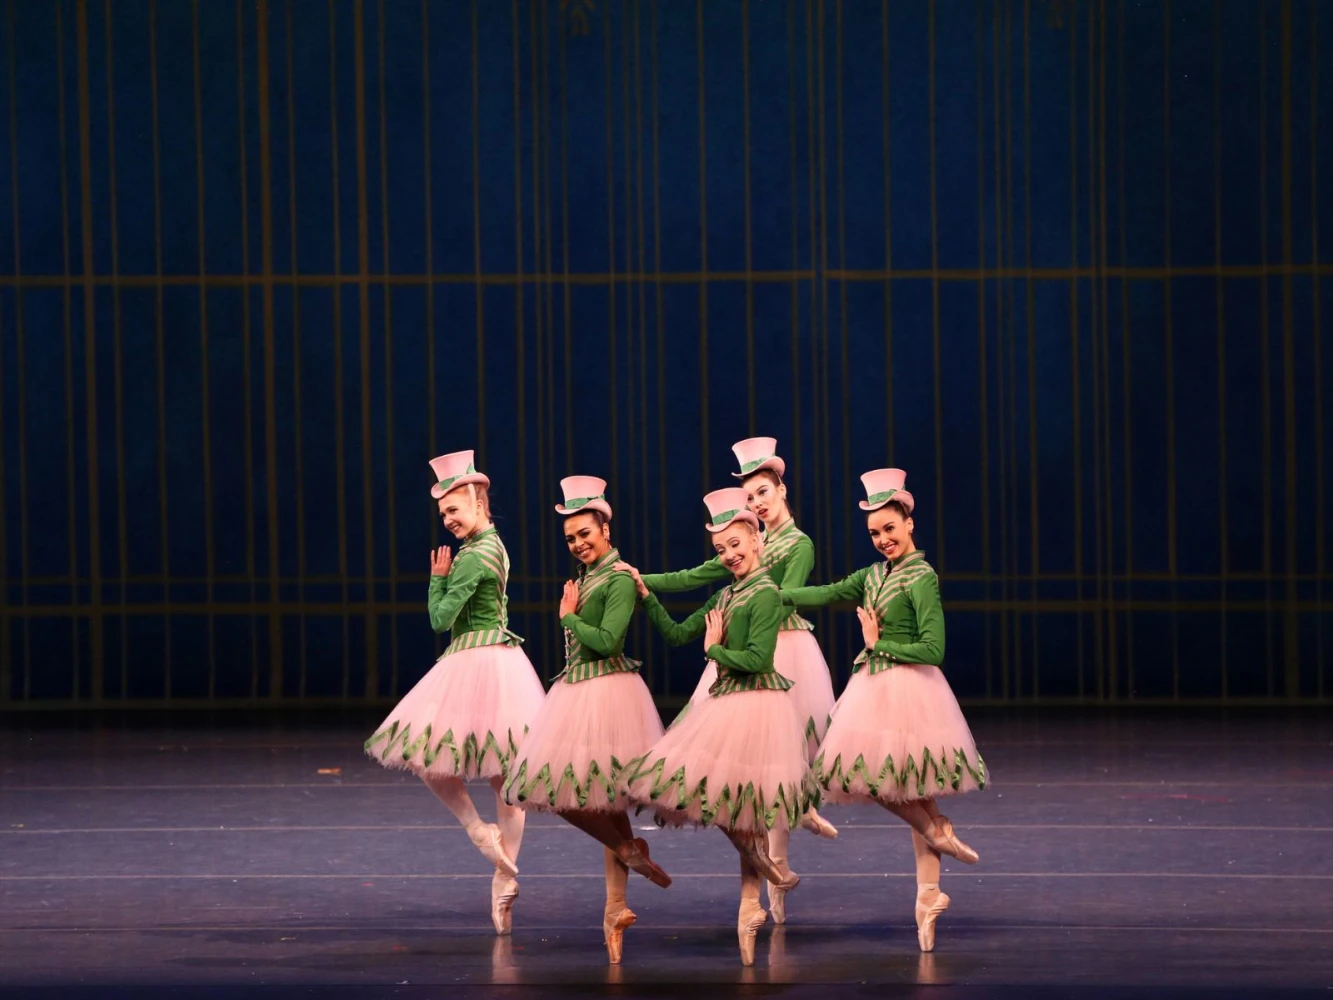 American Ballet Theatre's The Nutcracker: What to expect - 1